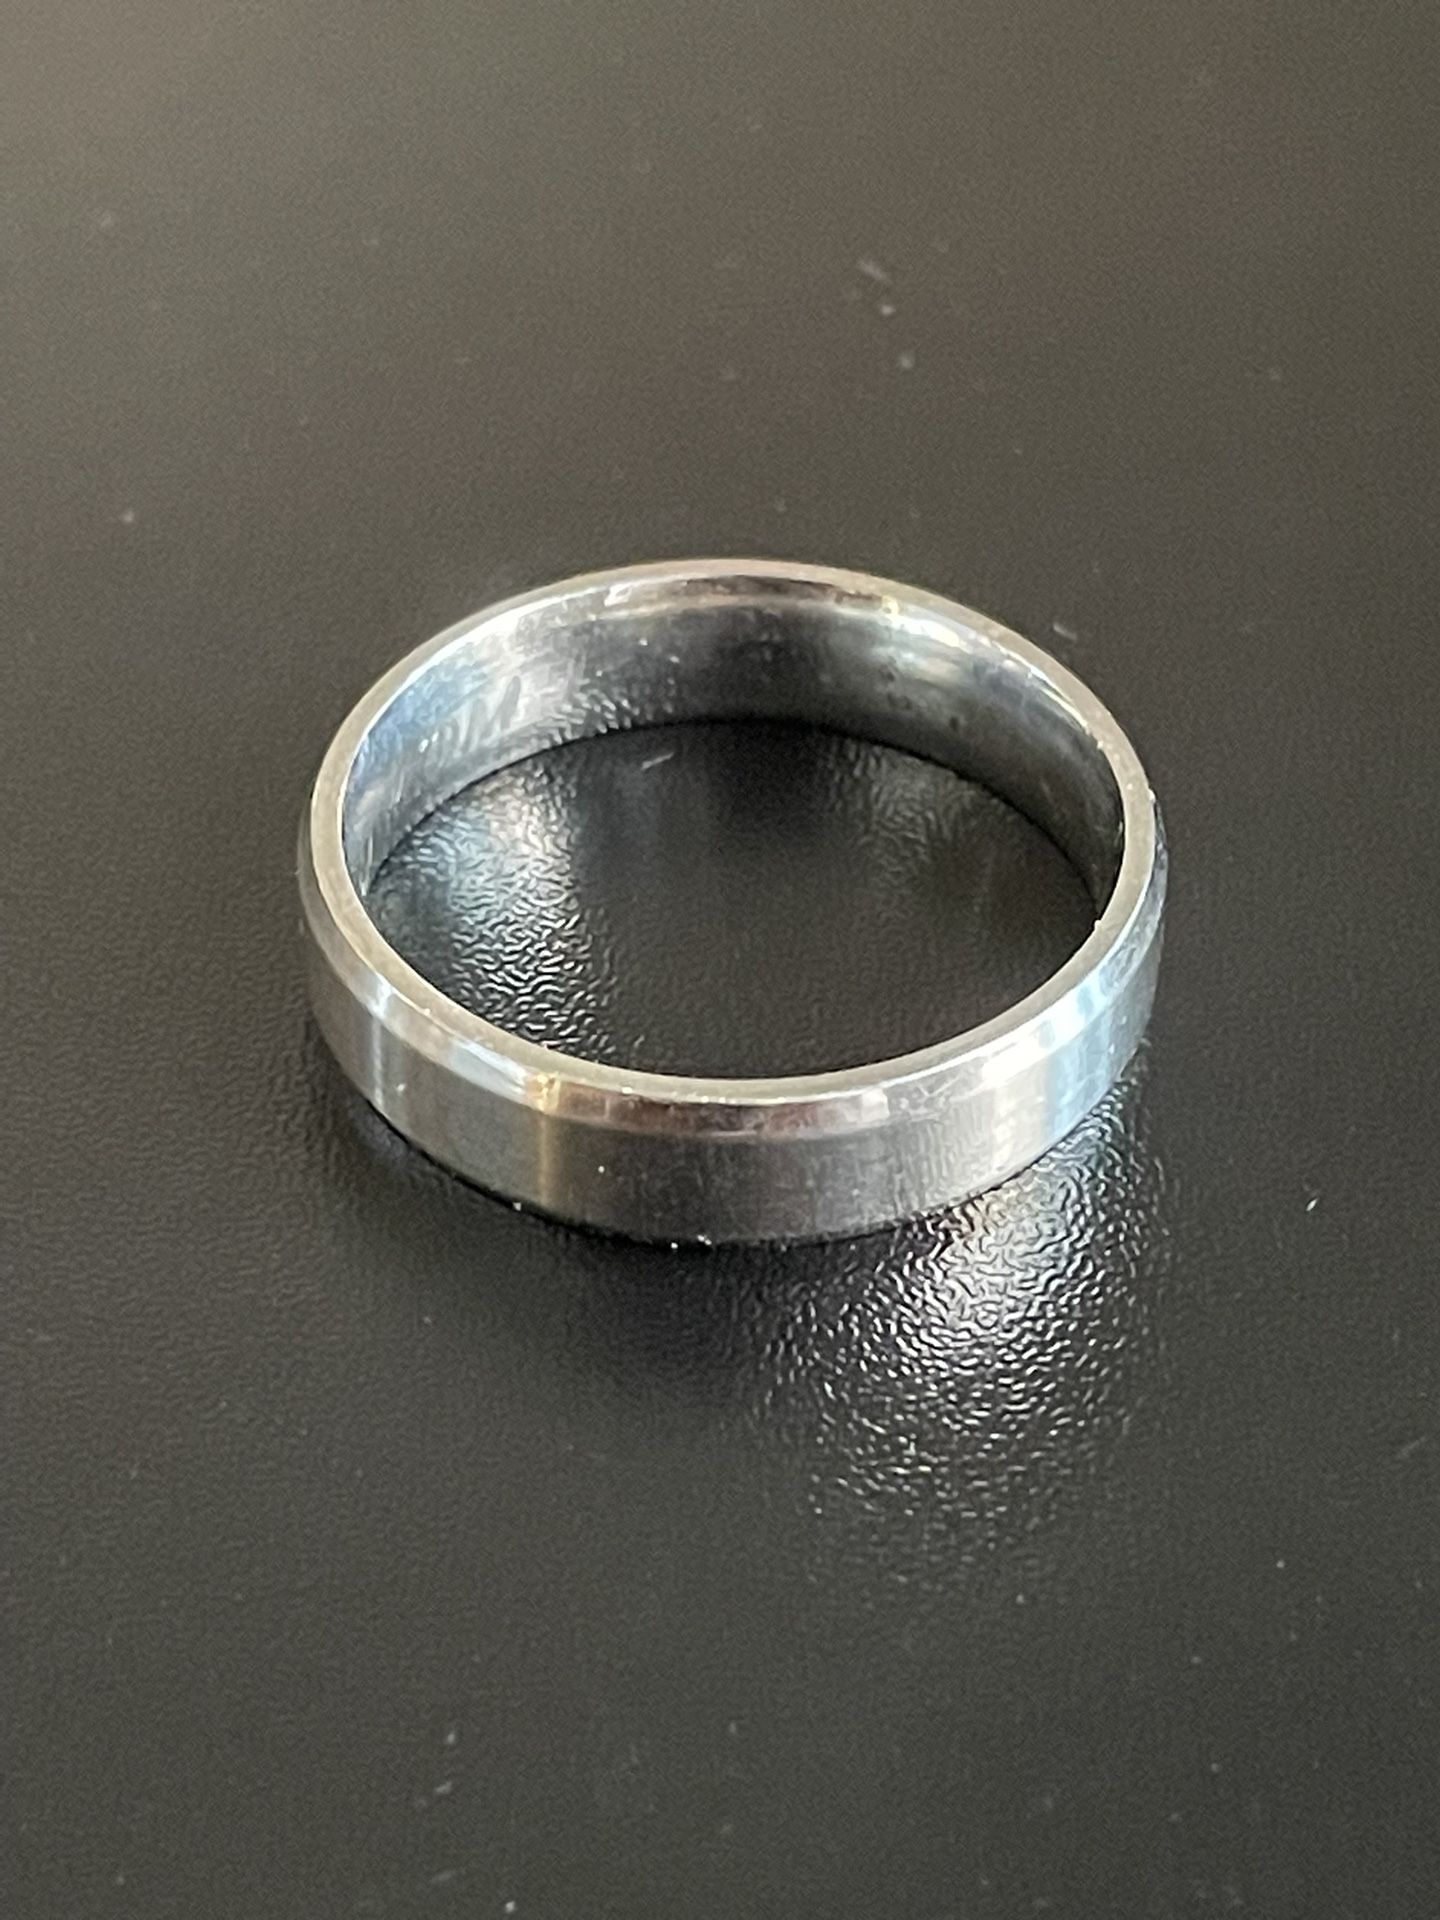 Pre-owned 6mm Silver Carbide Edge Ring Size 12